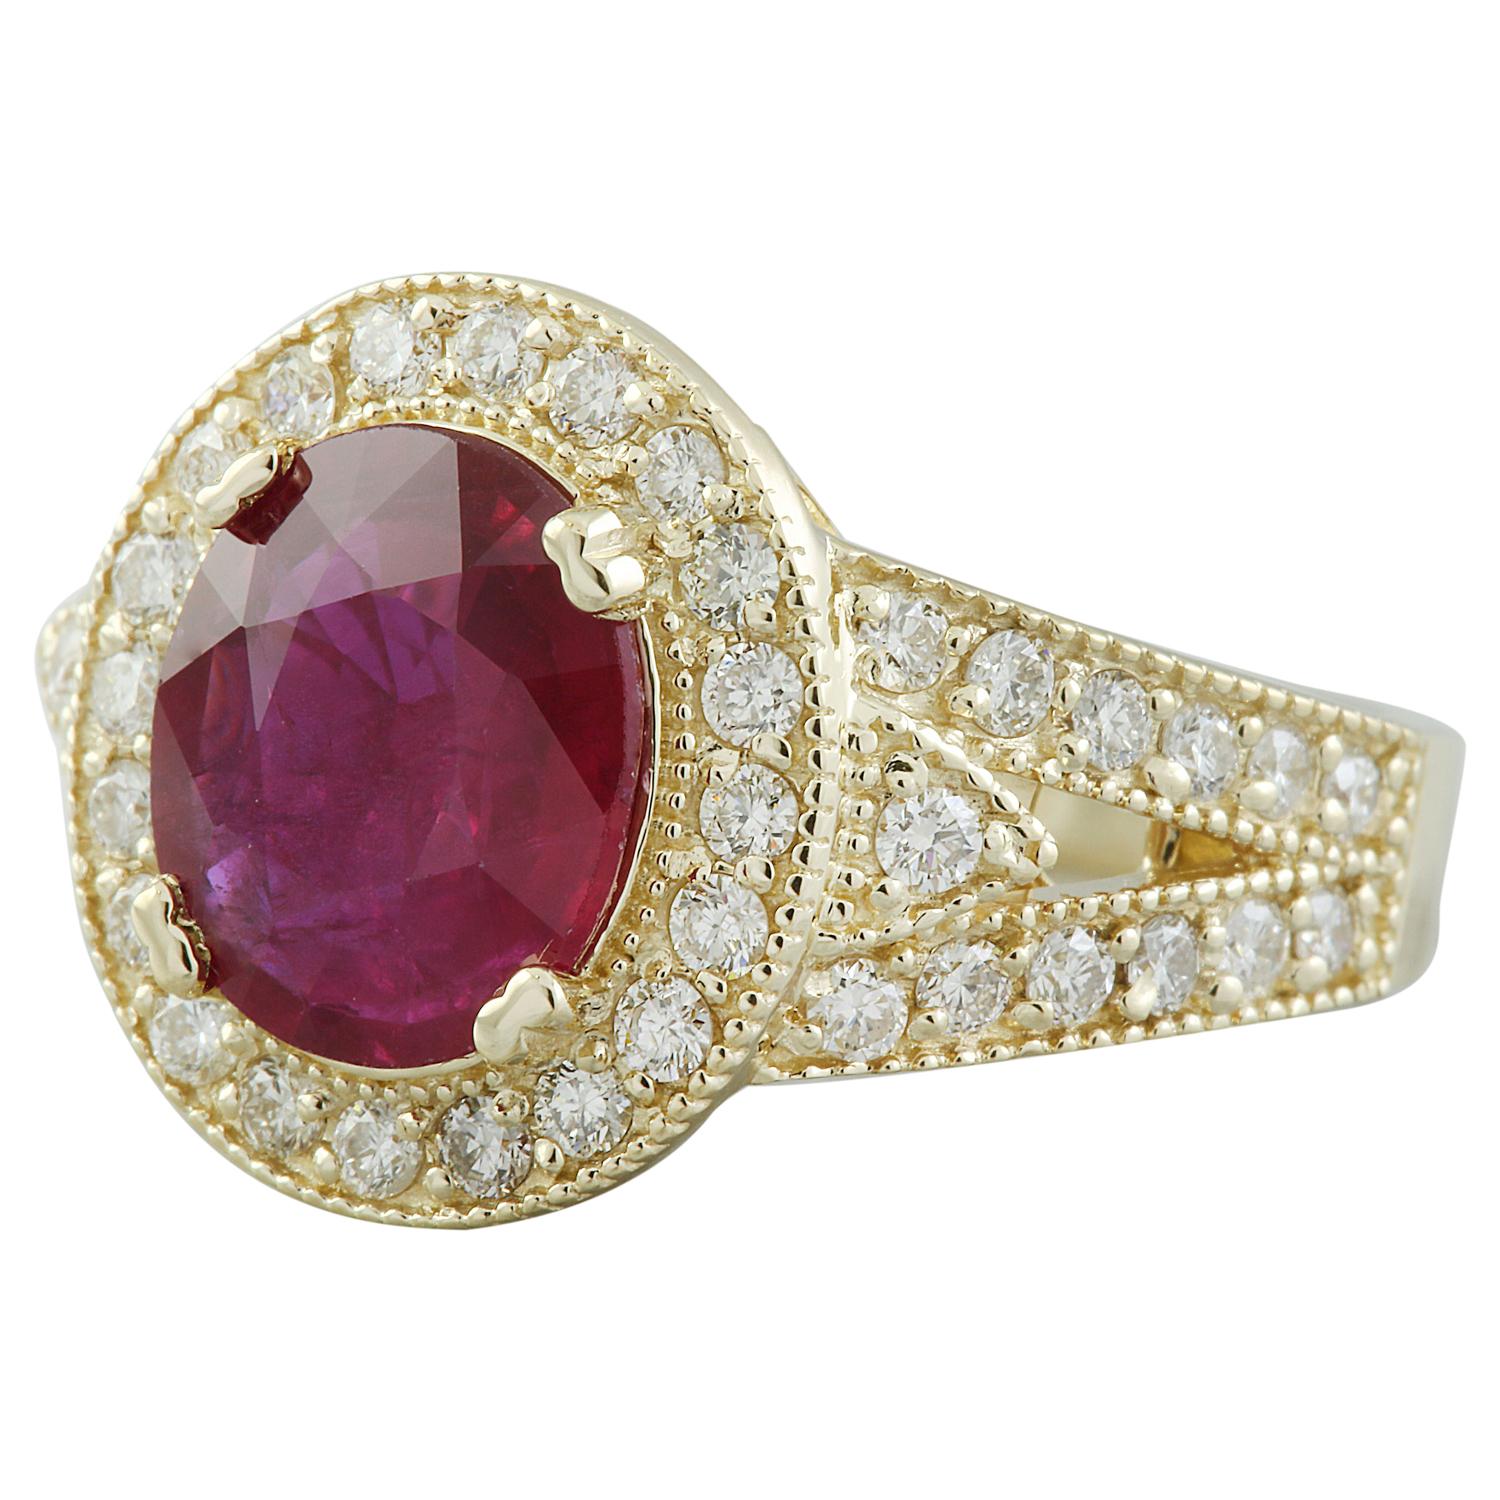 3.70 Carat Natural Ruby 14 Karat Solid Yellow Gold Diamond Ring
Stamped: 14K 
Total Ring Weight: 8 Grams 
Ruby Weight: 2.80 Carat (10.00x8.00 Millimeters) 
Diamond Weight: 0.90 carat (F-G Color, VS2-SI1 Clarity )
Quantity: 46
Face Measures: